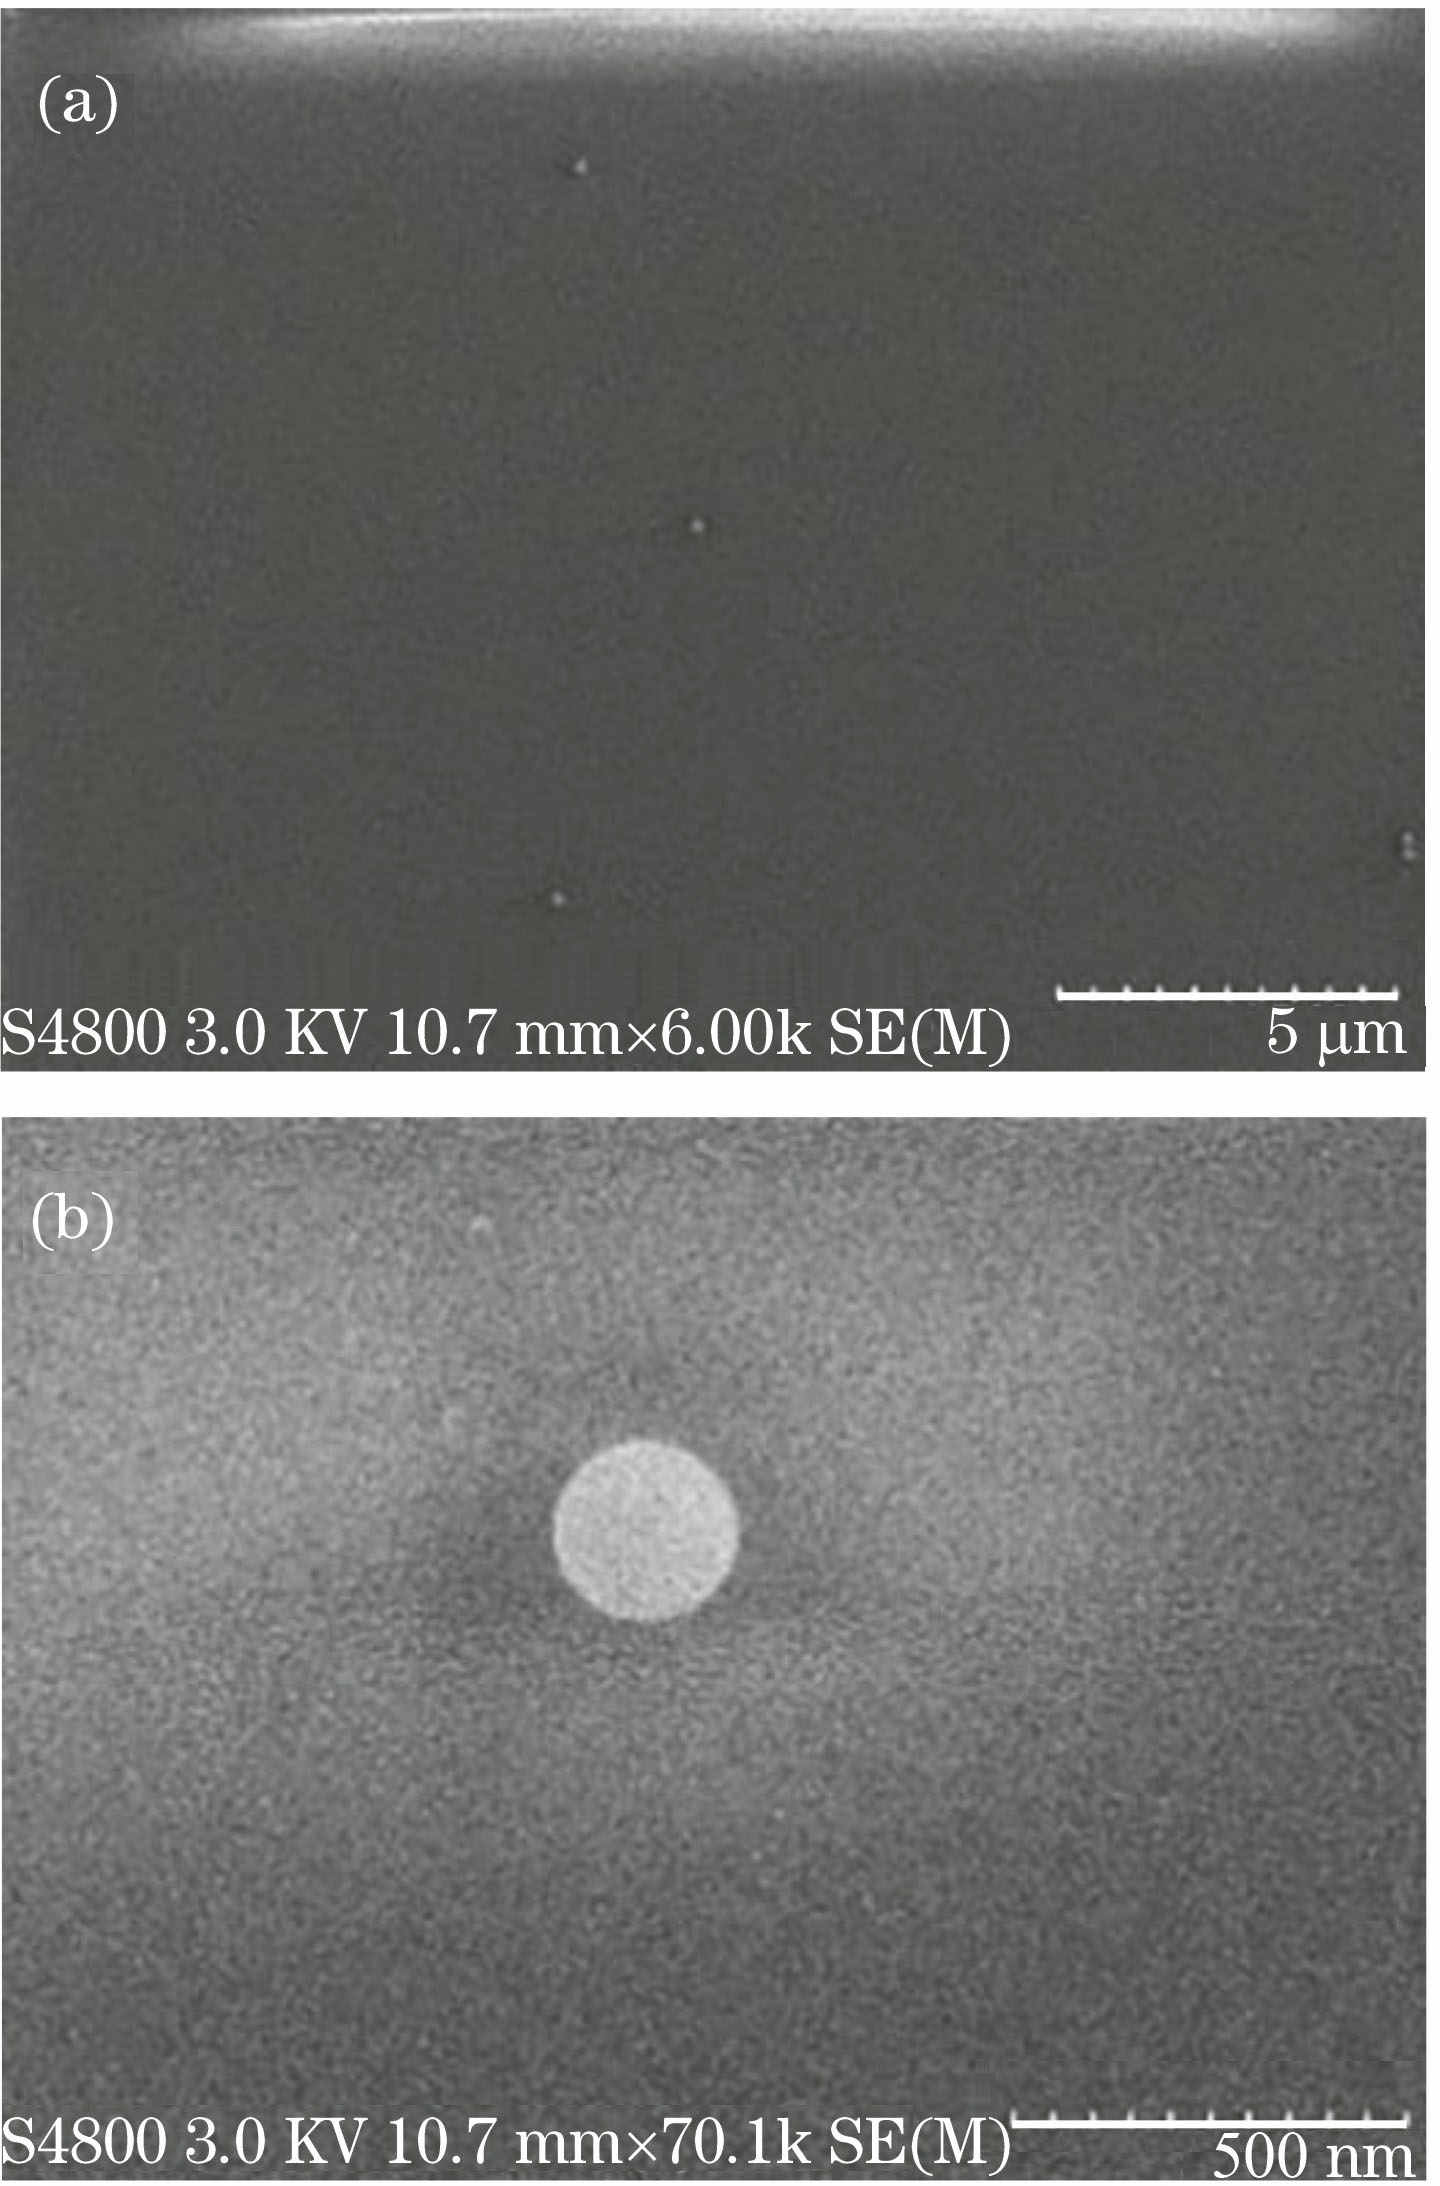 (a) SEM image of 200 nm polystyrene nanoparticle distribution; (b) SEM image of single nanoparticle